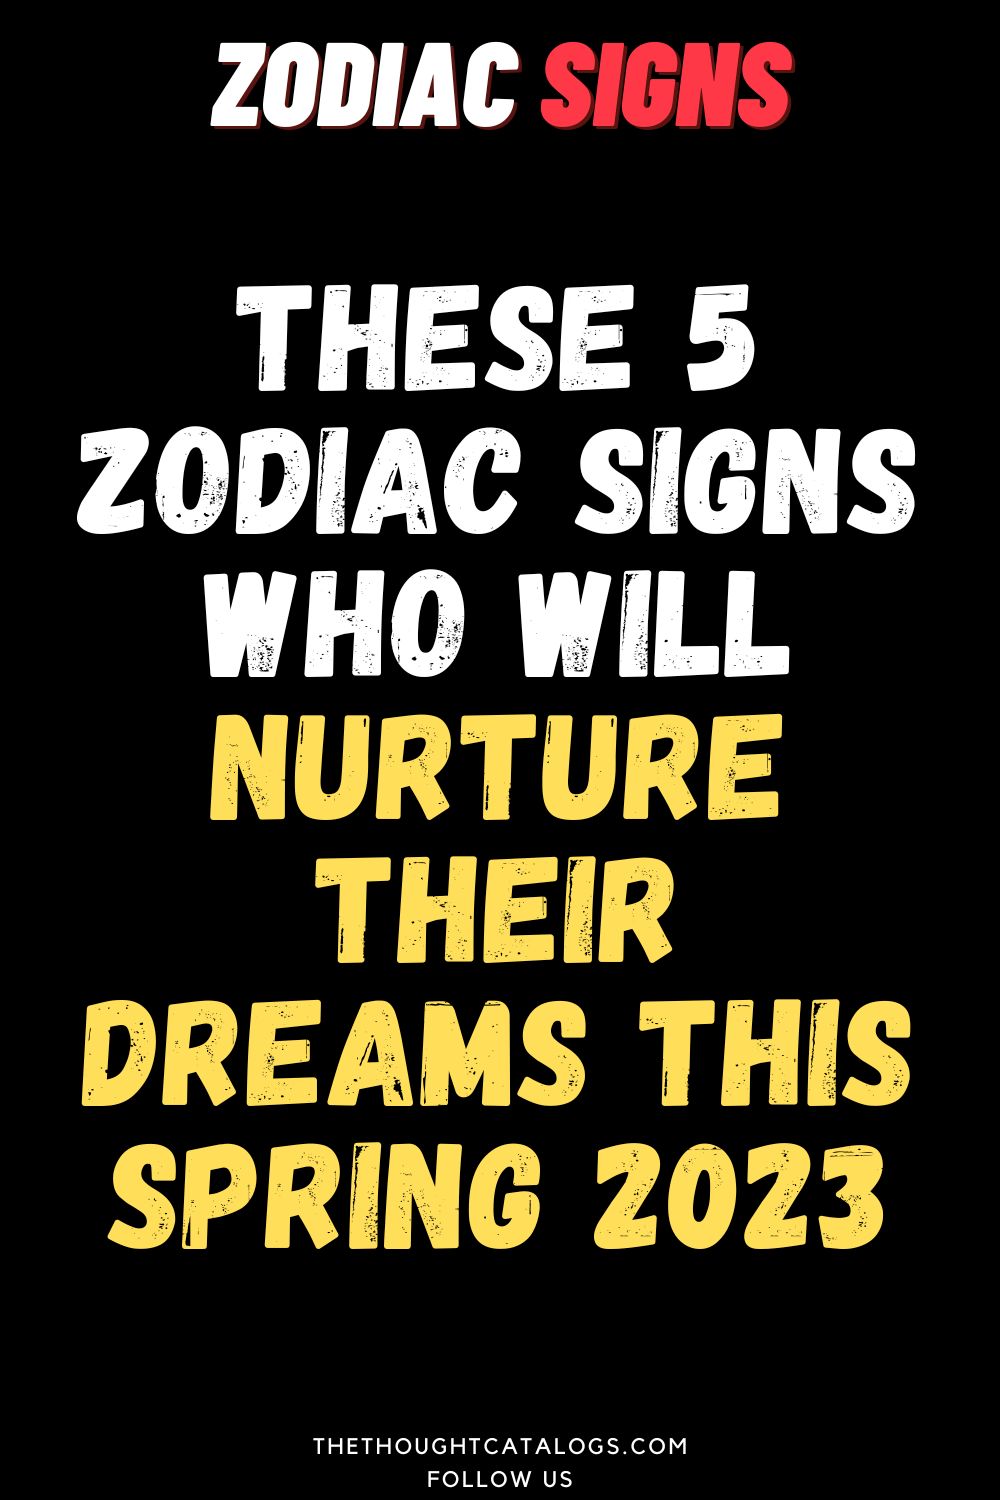 5 Zodiac Signs Who Will Nurture Their Dreams This Spring 2023